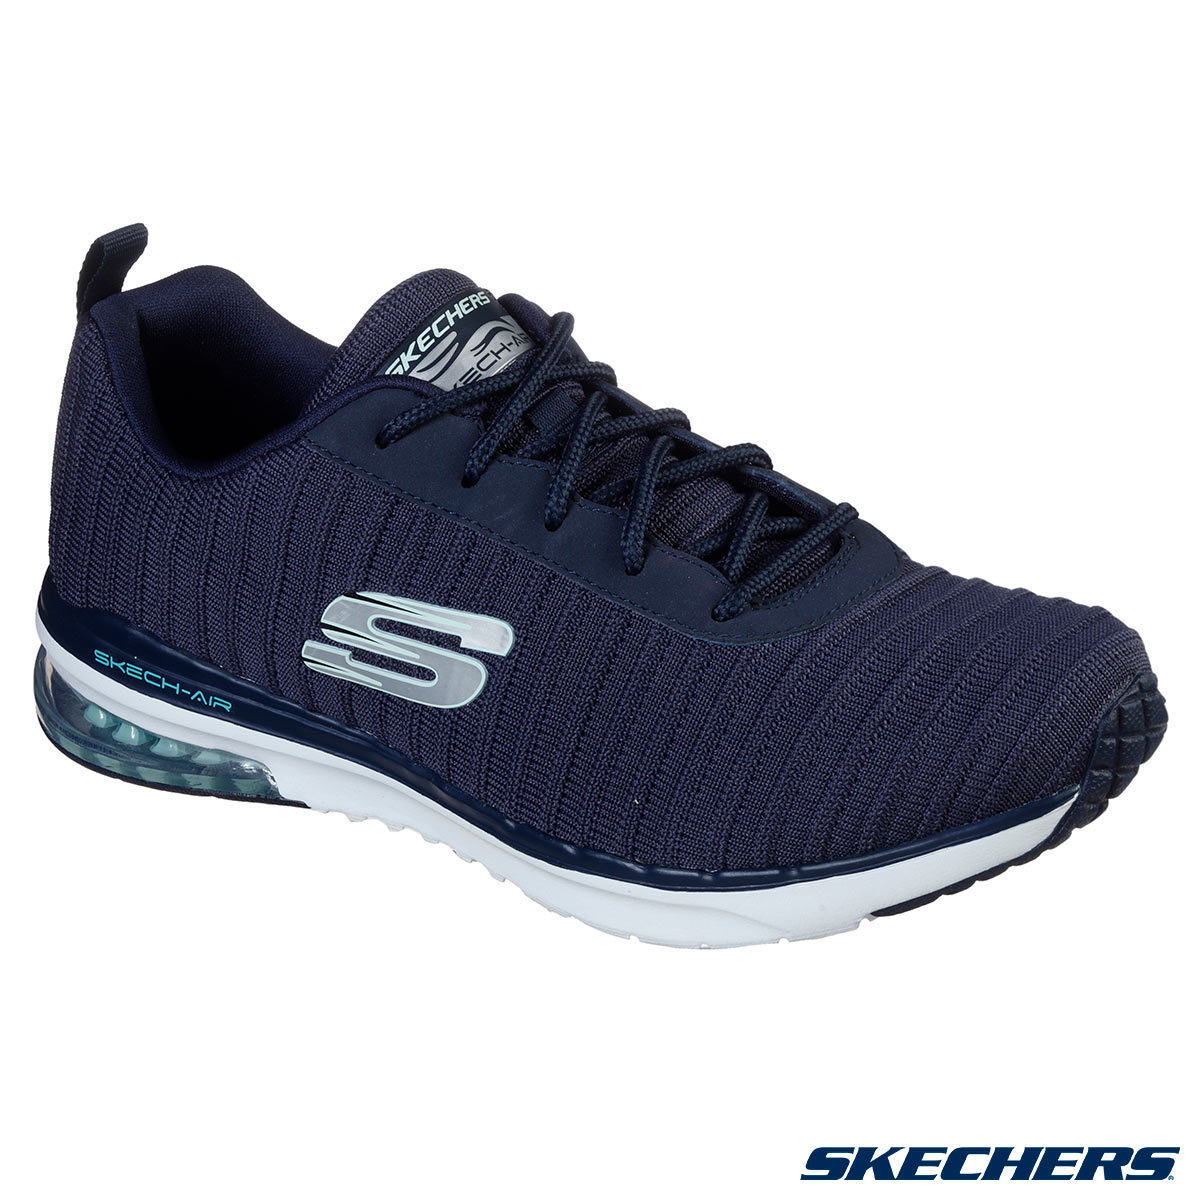 cheap sketcher trainers